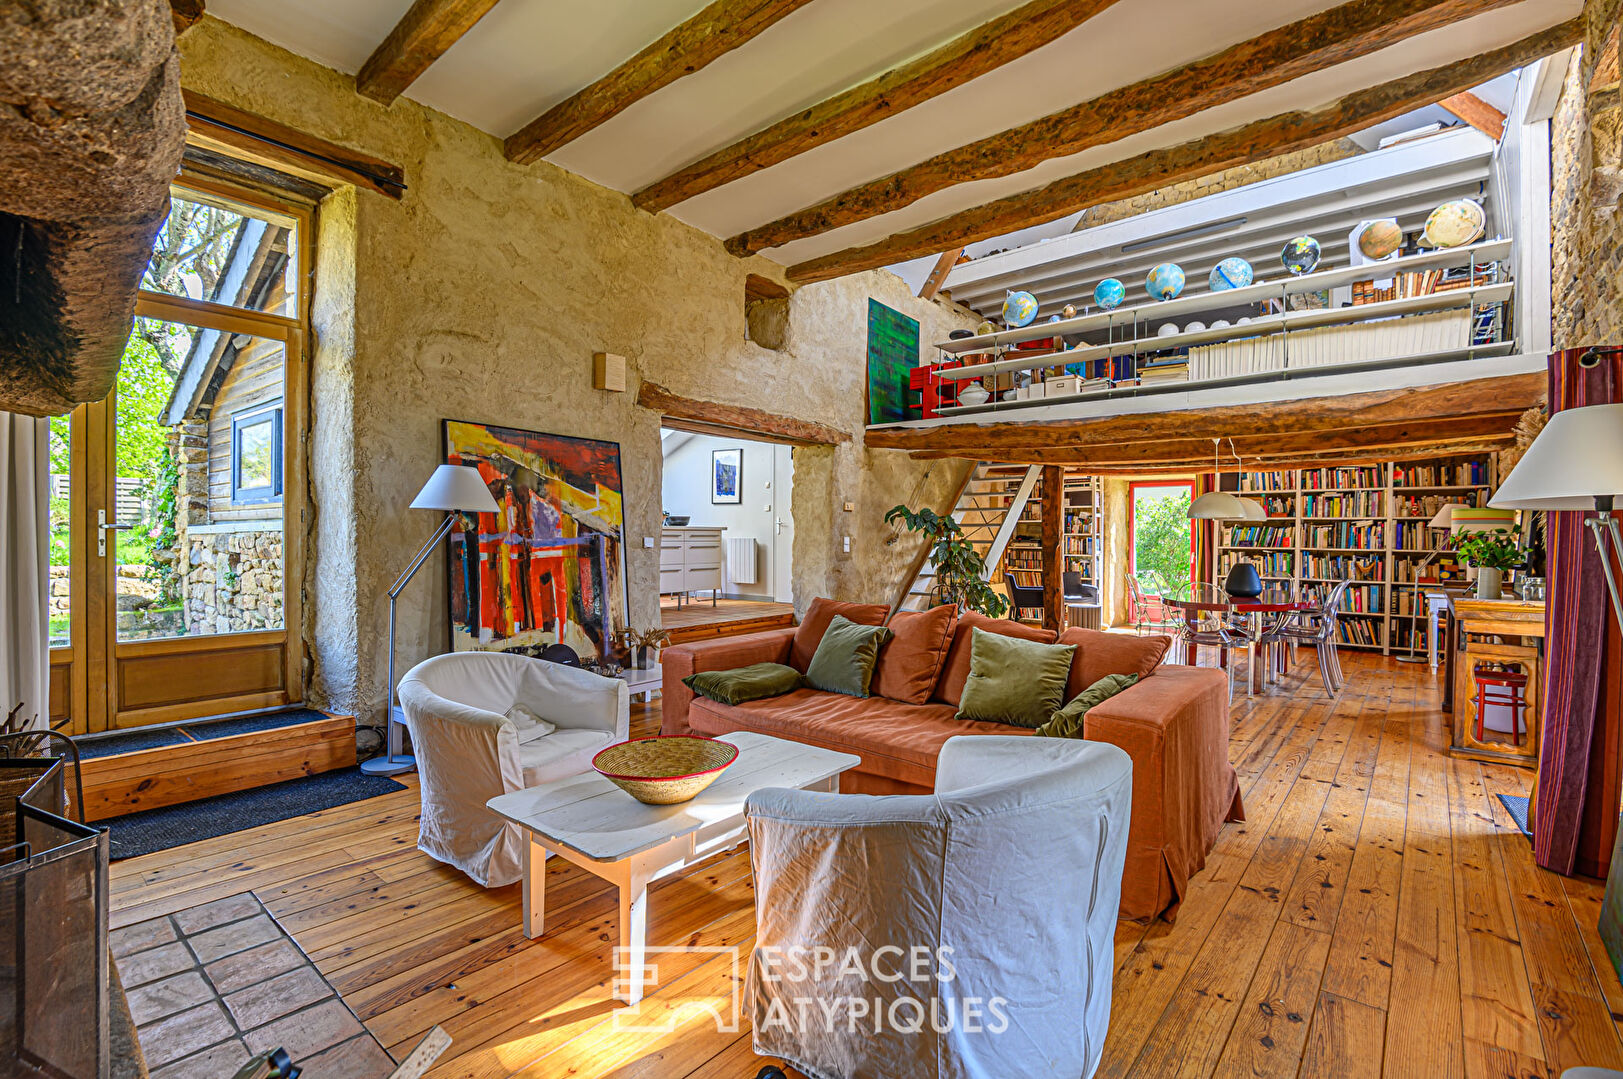 Authentic family home in the heart of a hamlet